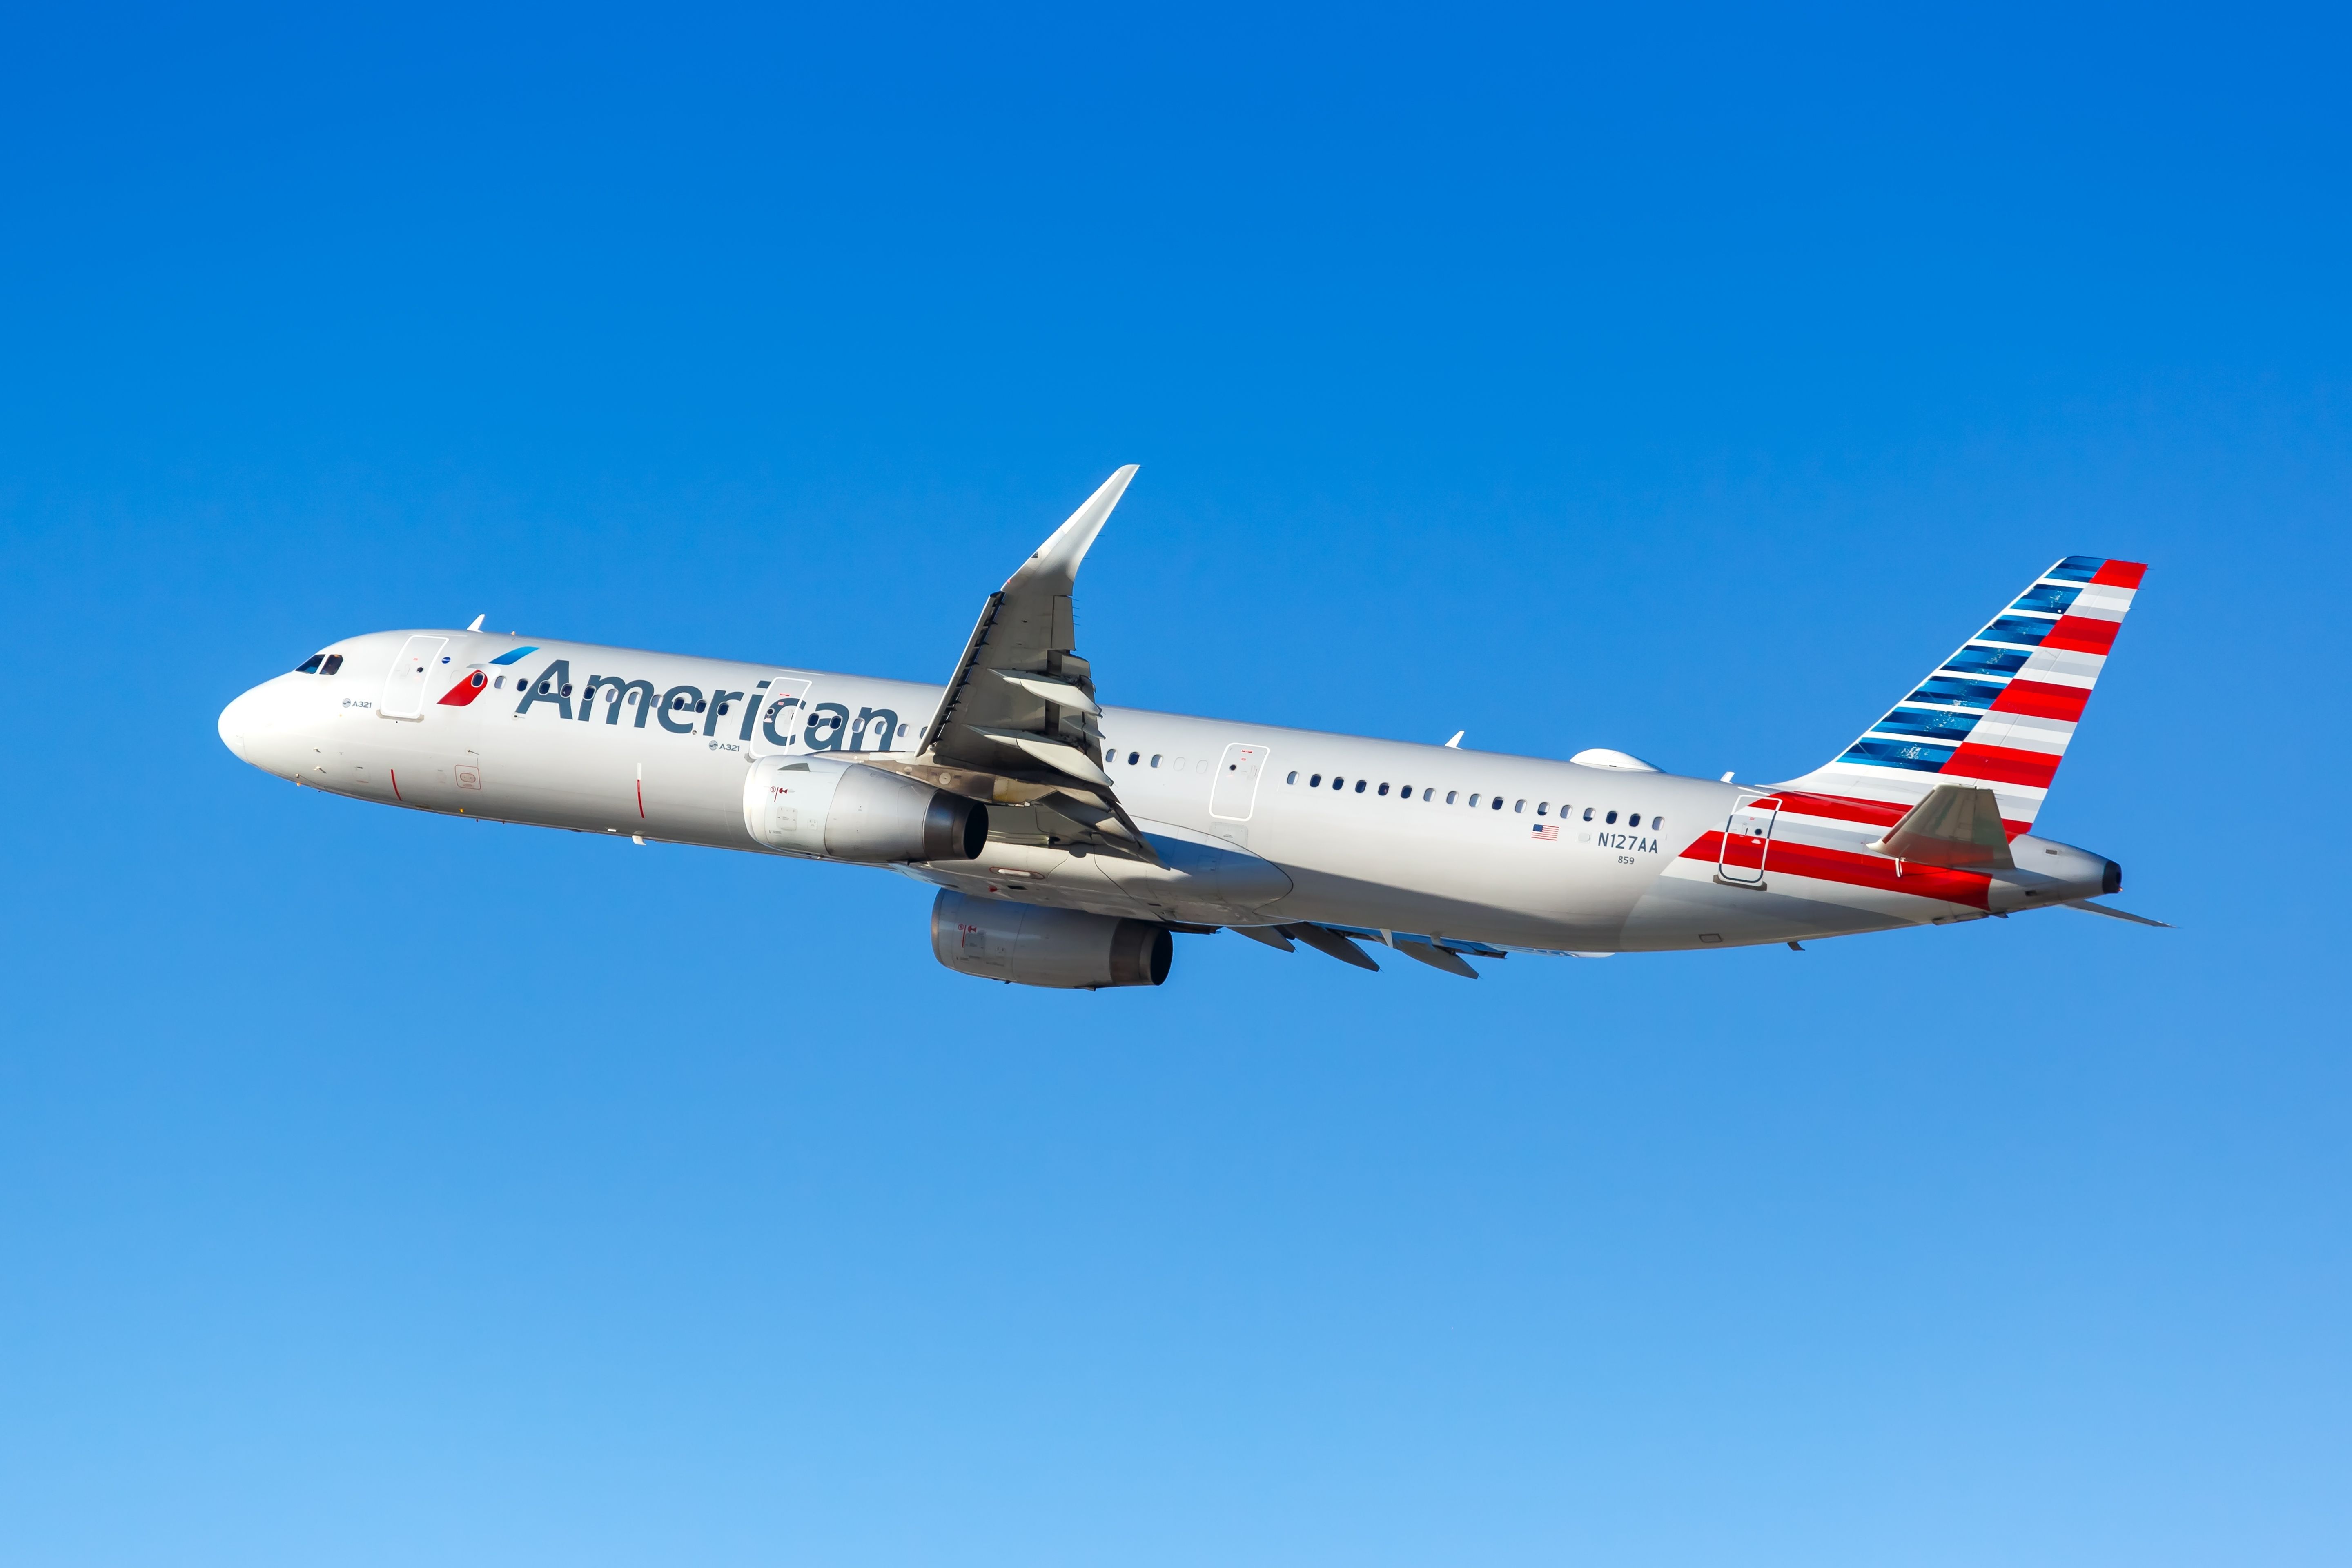 An American Airlines Airbus A321 Flying in the sky.